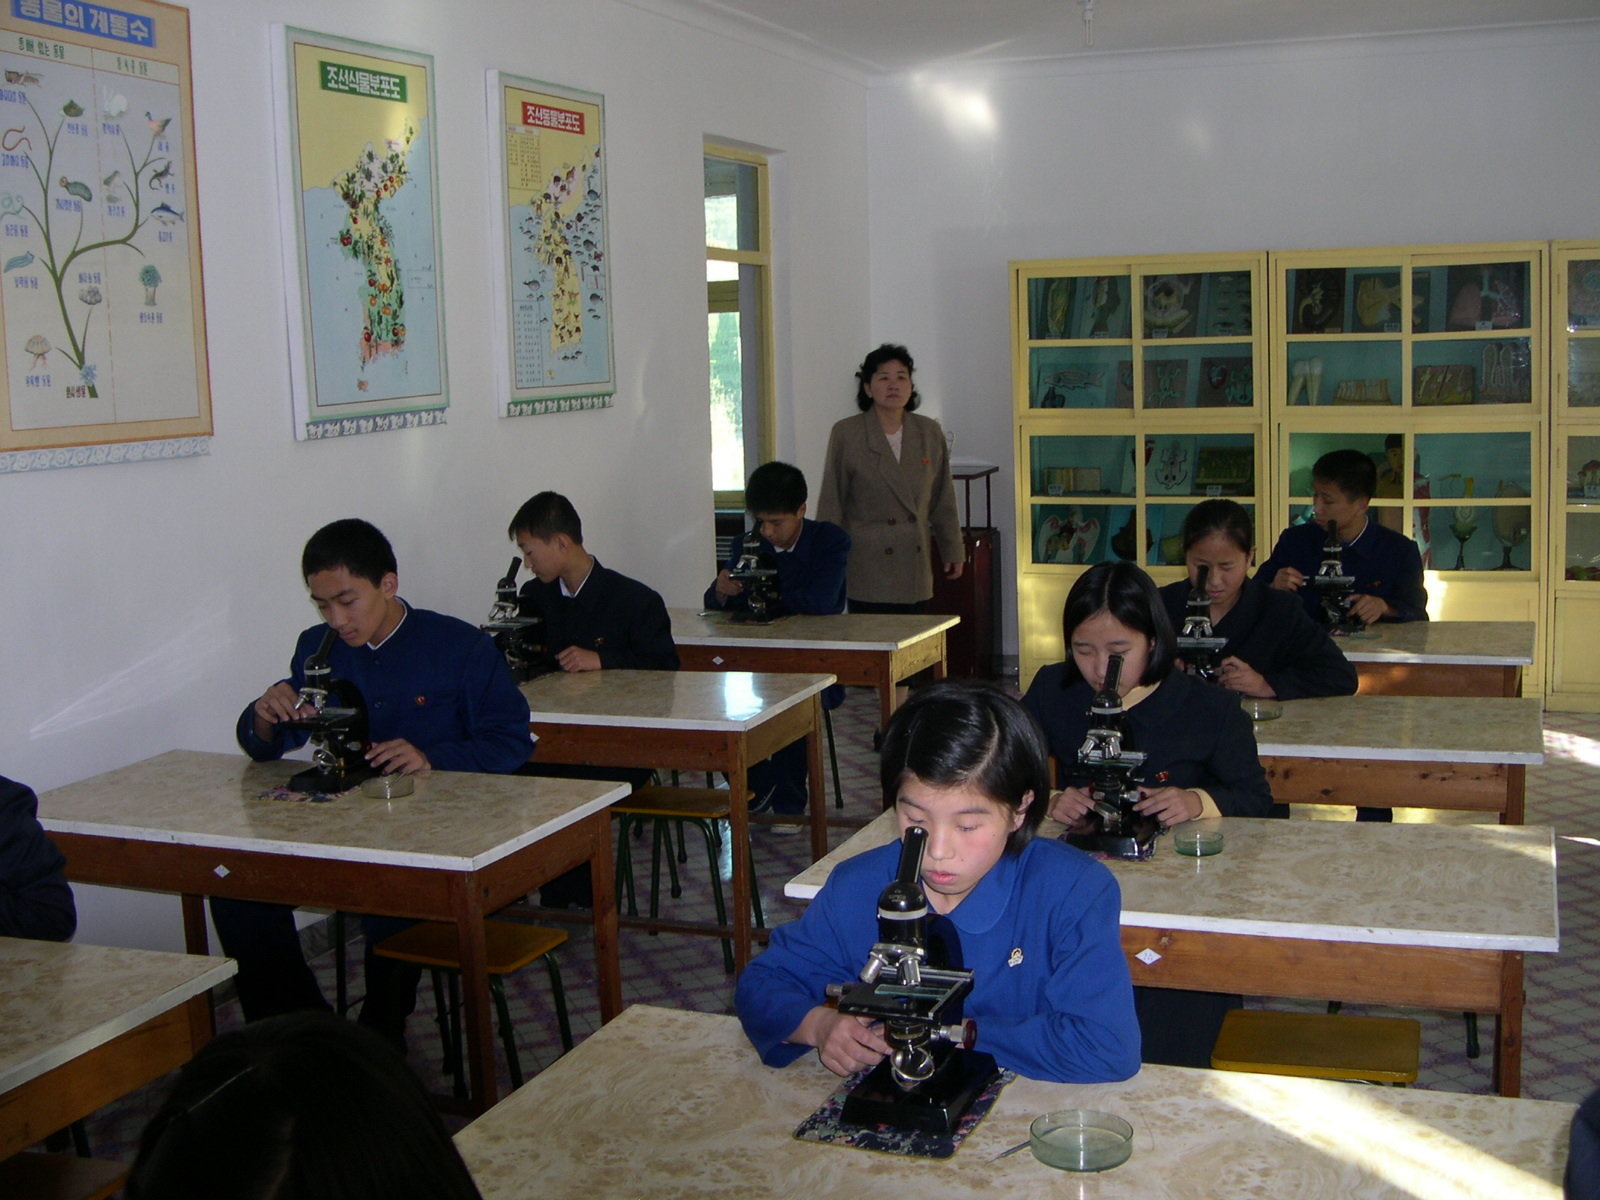 Students sitting at their desks and looking into microscopes with a woman teacher looking on